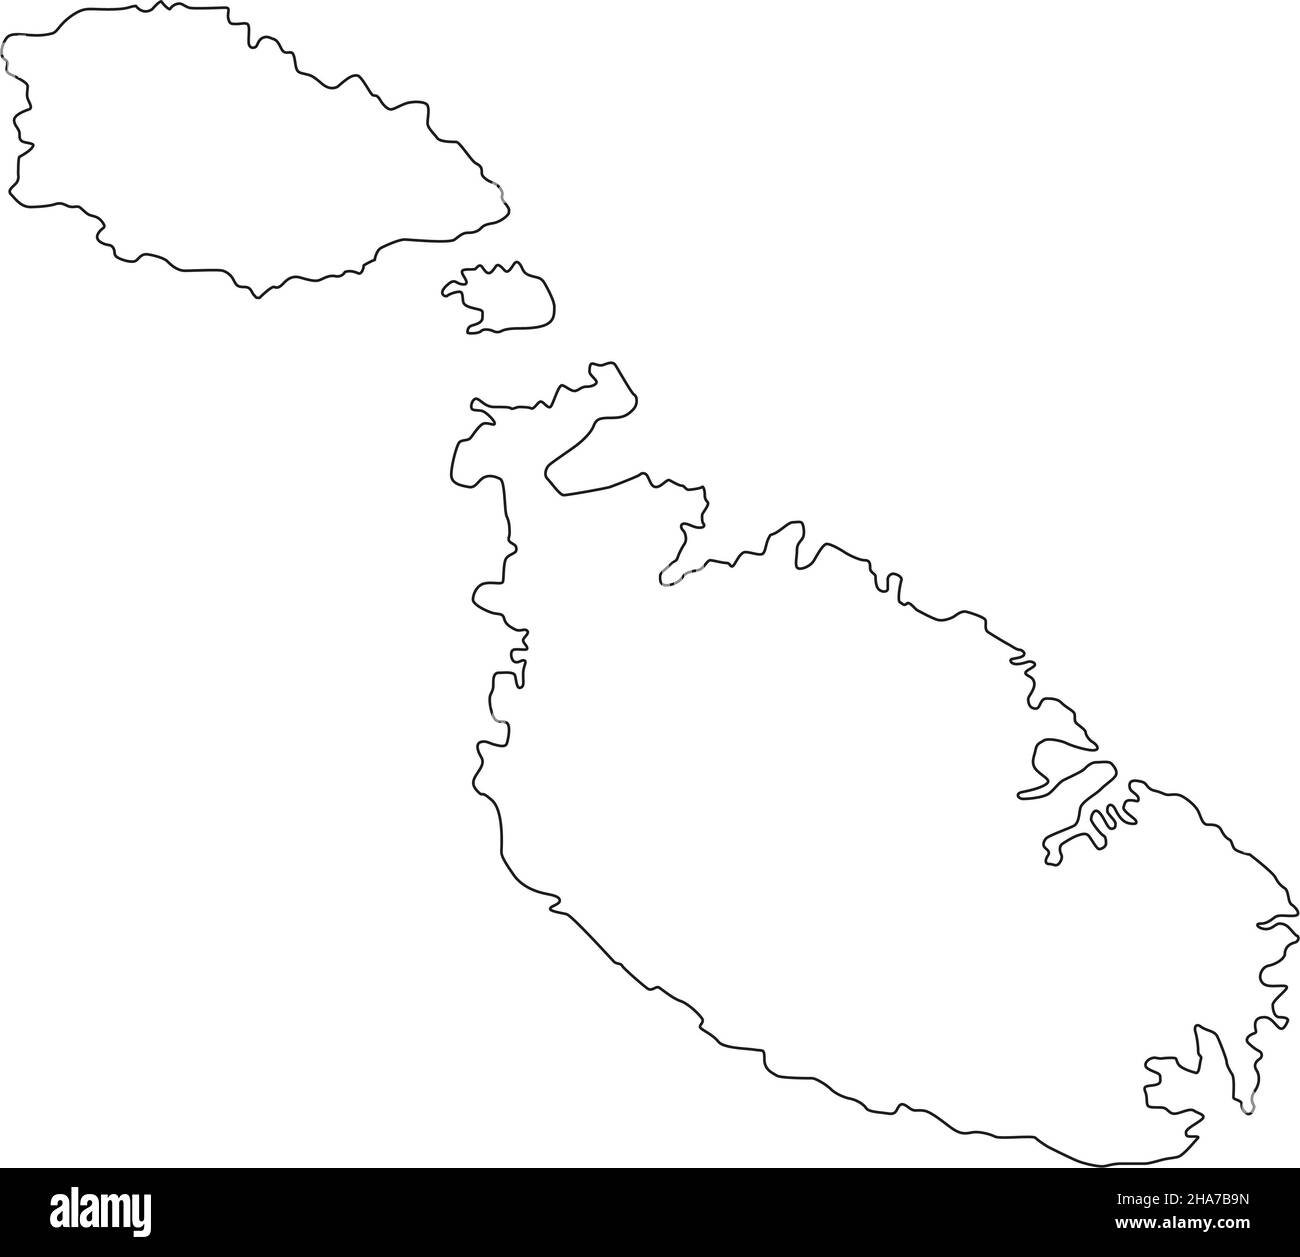 Outline of Malta map with black color on a white background Stock Photo